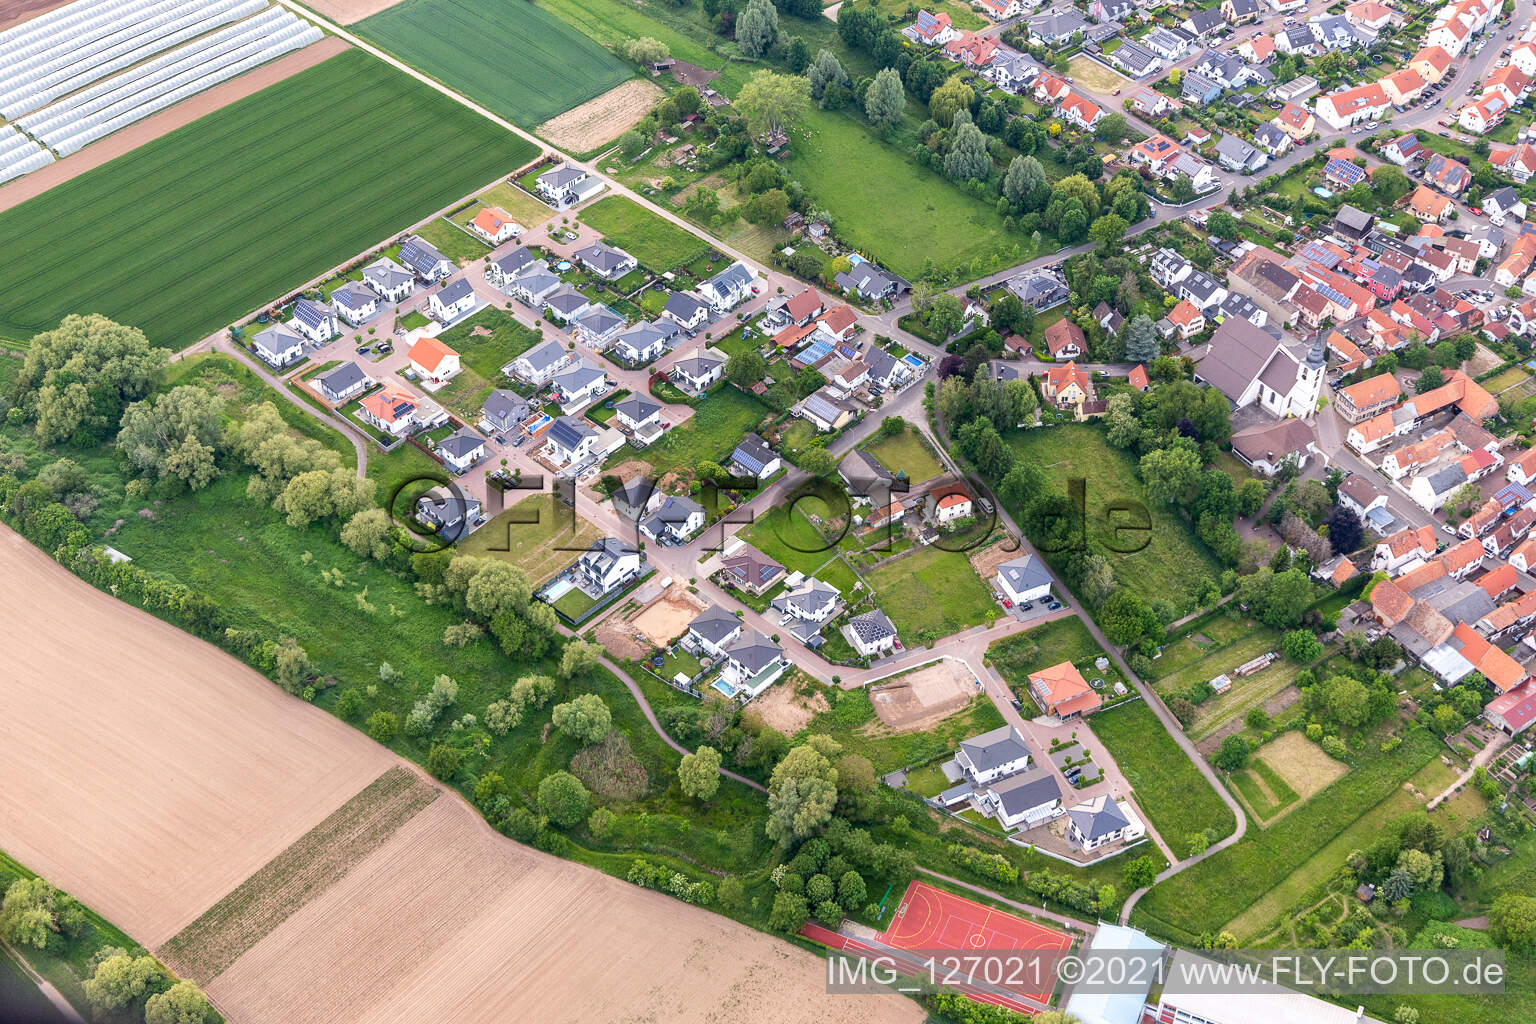 Aerial view of Into the Hundred Acres in Offenbach an der Queich in the state Rhineland-Palatinate, Germany